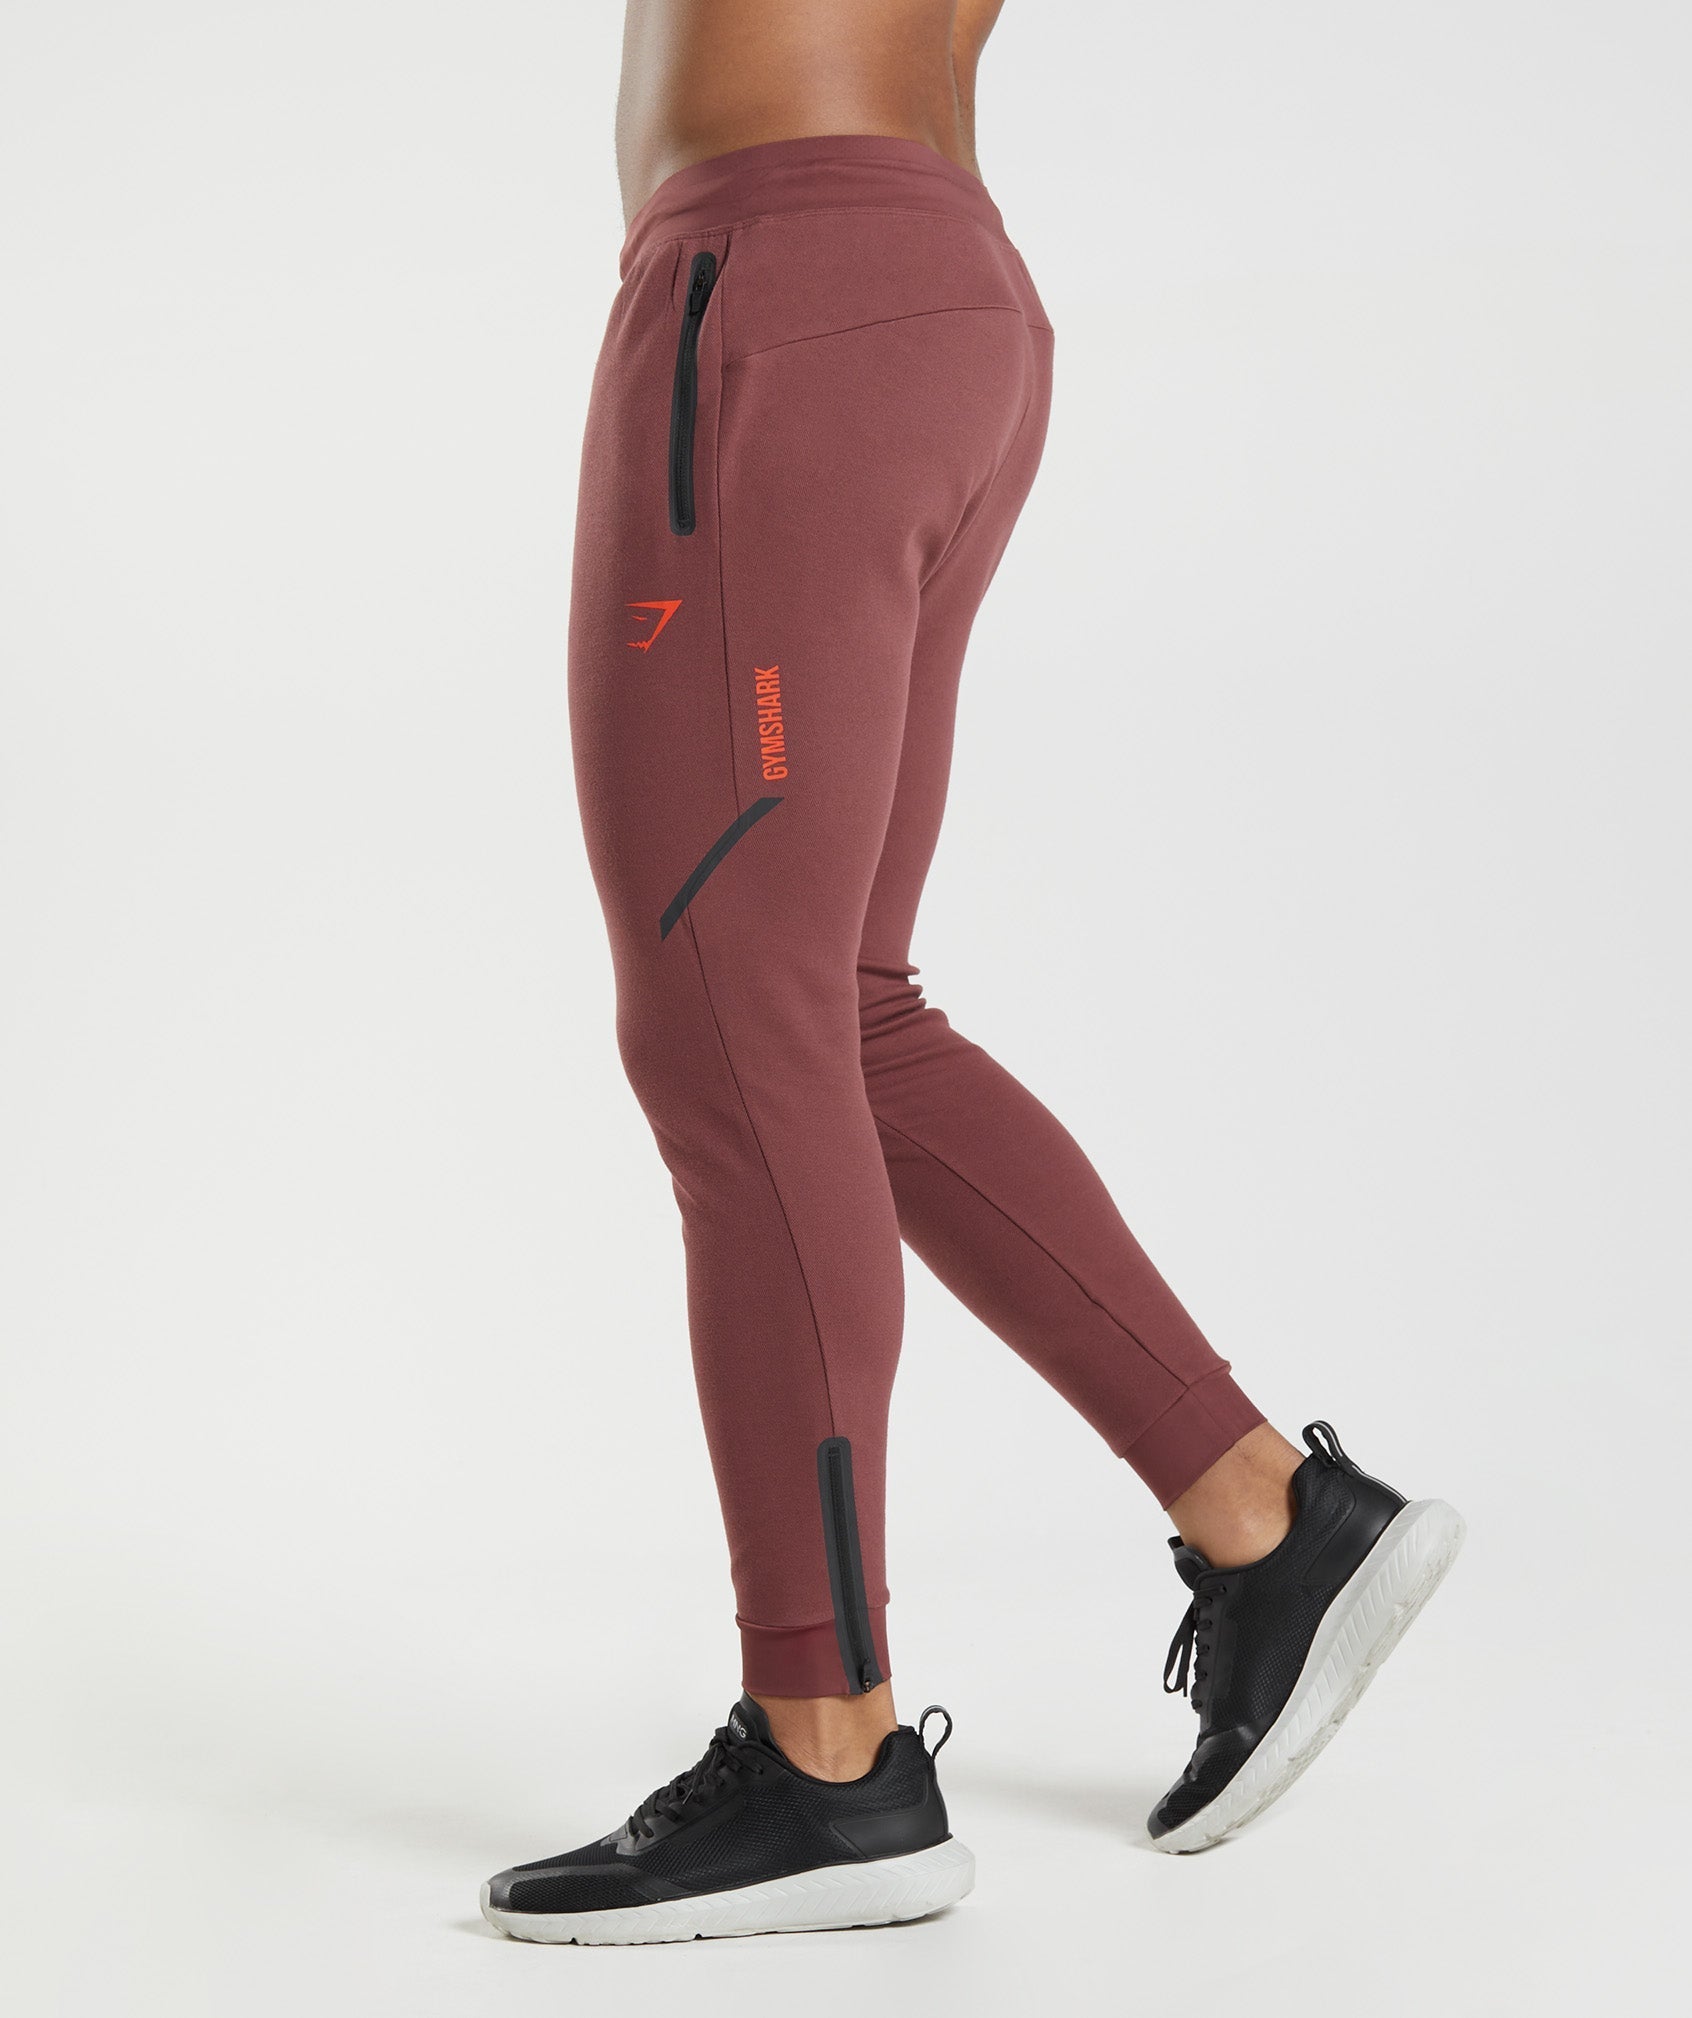 Apex Technical Joggers in Cherry Brown - view 3